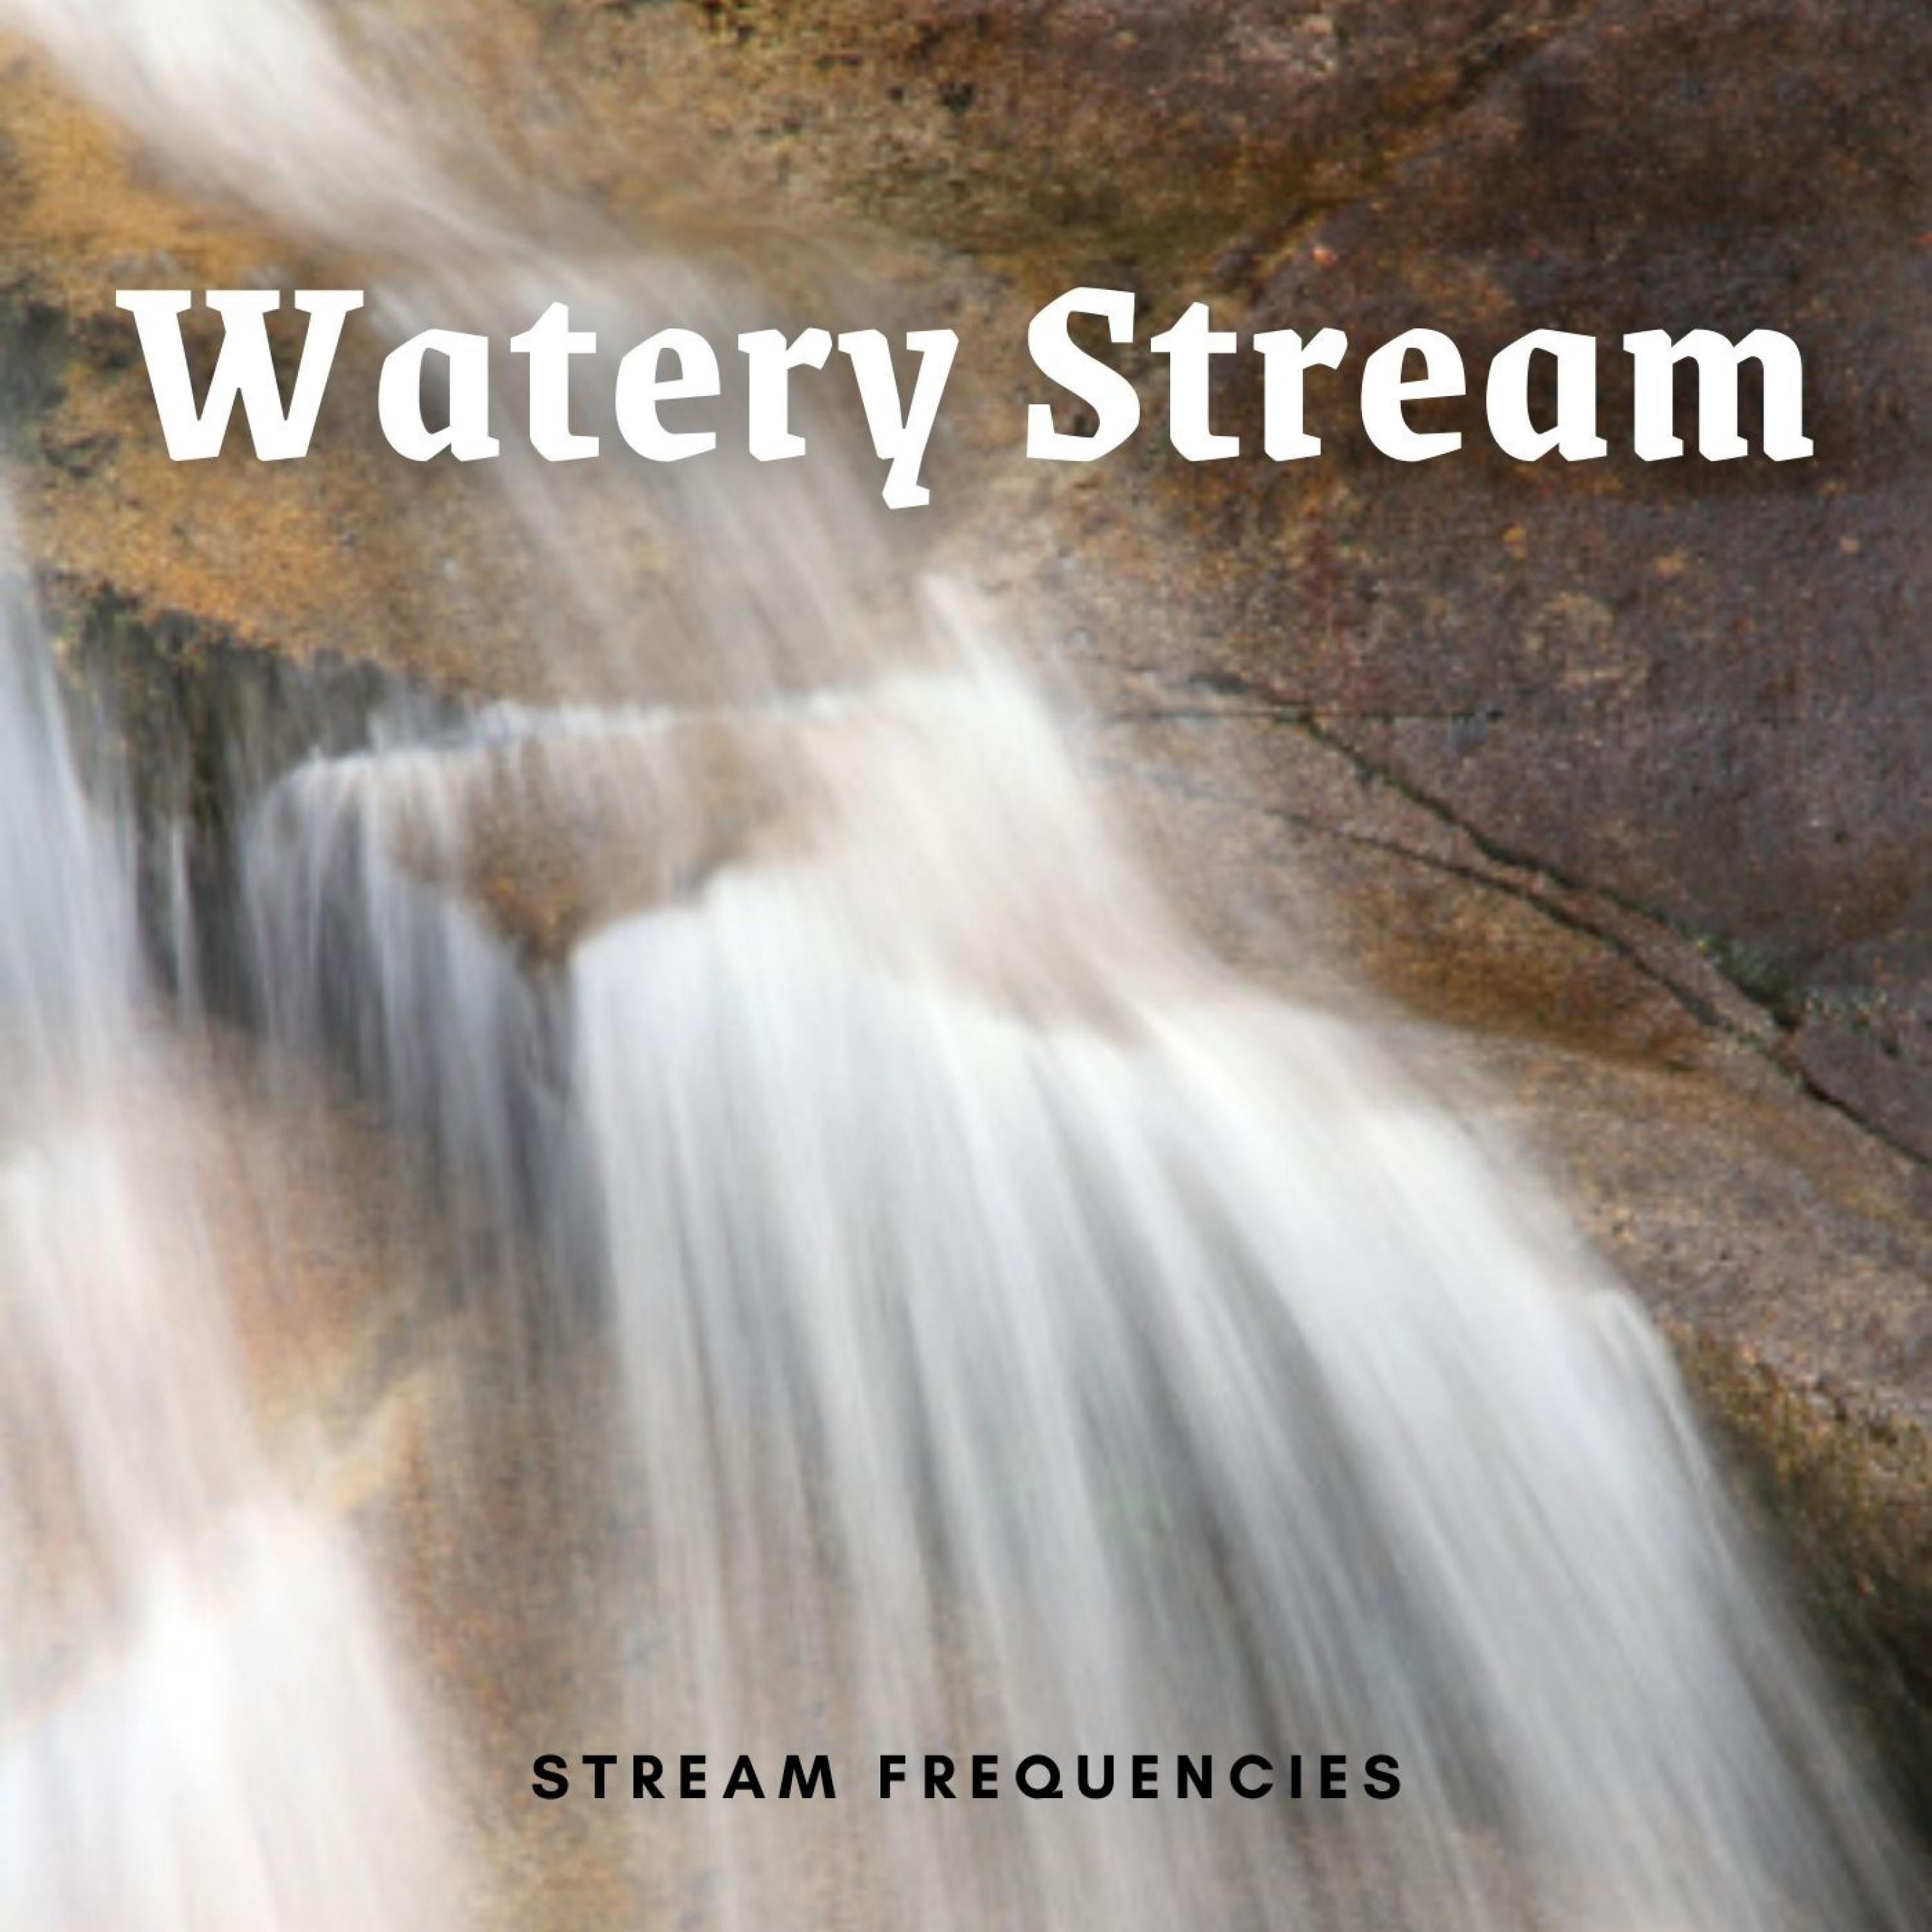 Water Soundscapes - Rapid ending in Waterfall